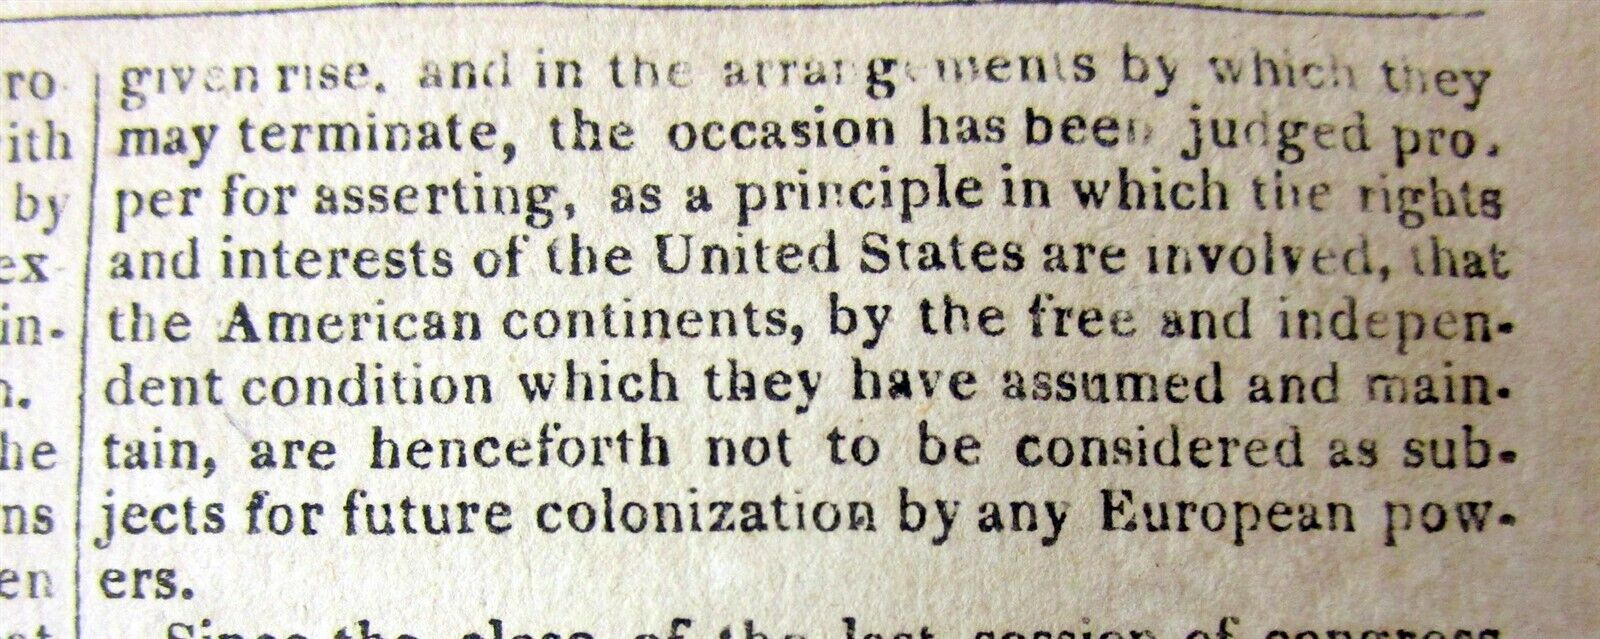 1823 newspaper RARE early printing of MONROE DOCTRINE in State of Union Speech